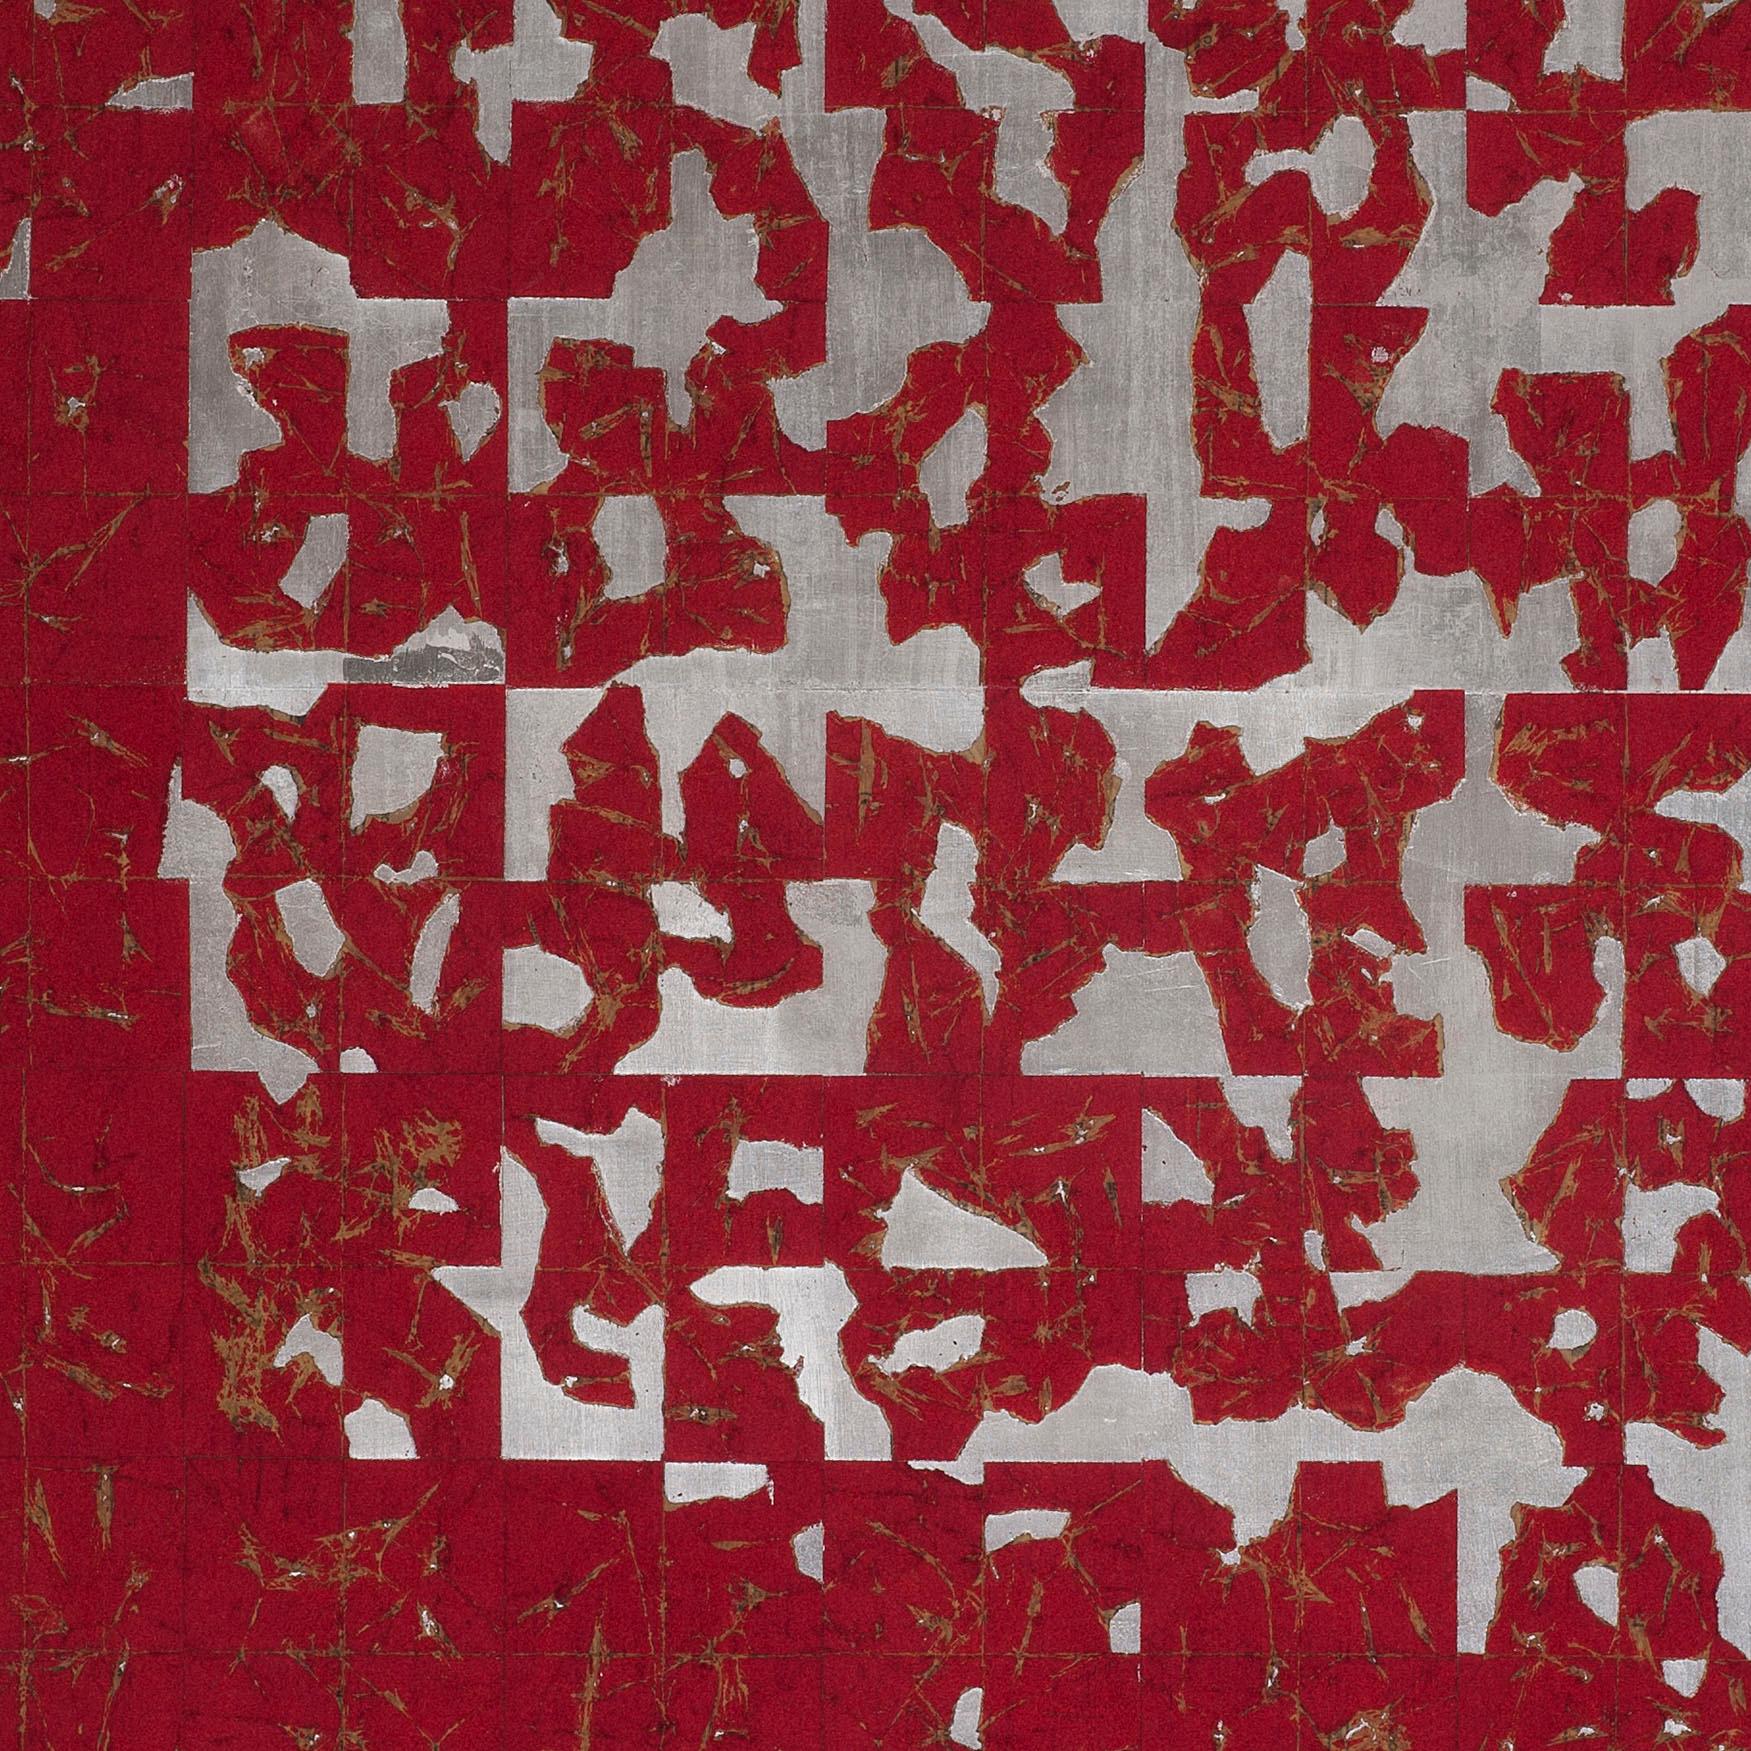 Fissure - Red Abstract Painting by Scott Andresen